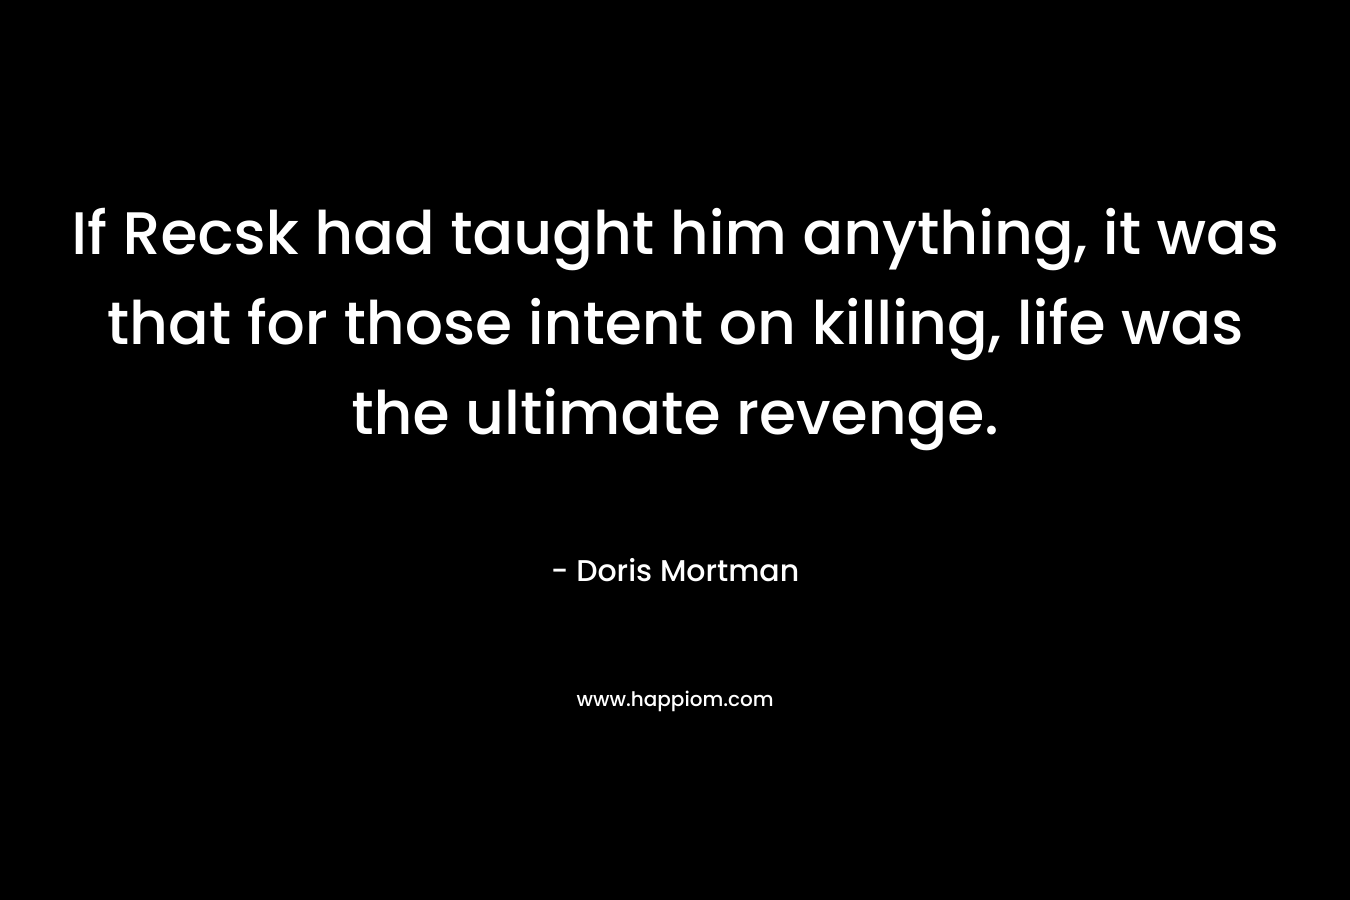 If Recsk had taught him anything, it was that for those intent on killing, life was the ultimate revenge. – Doris Mortman